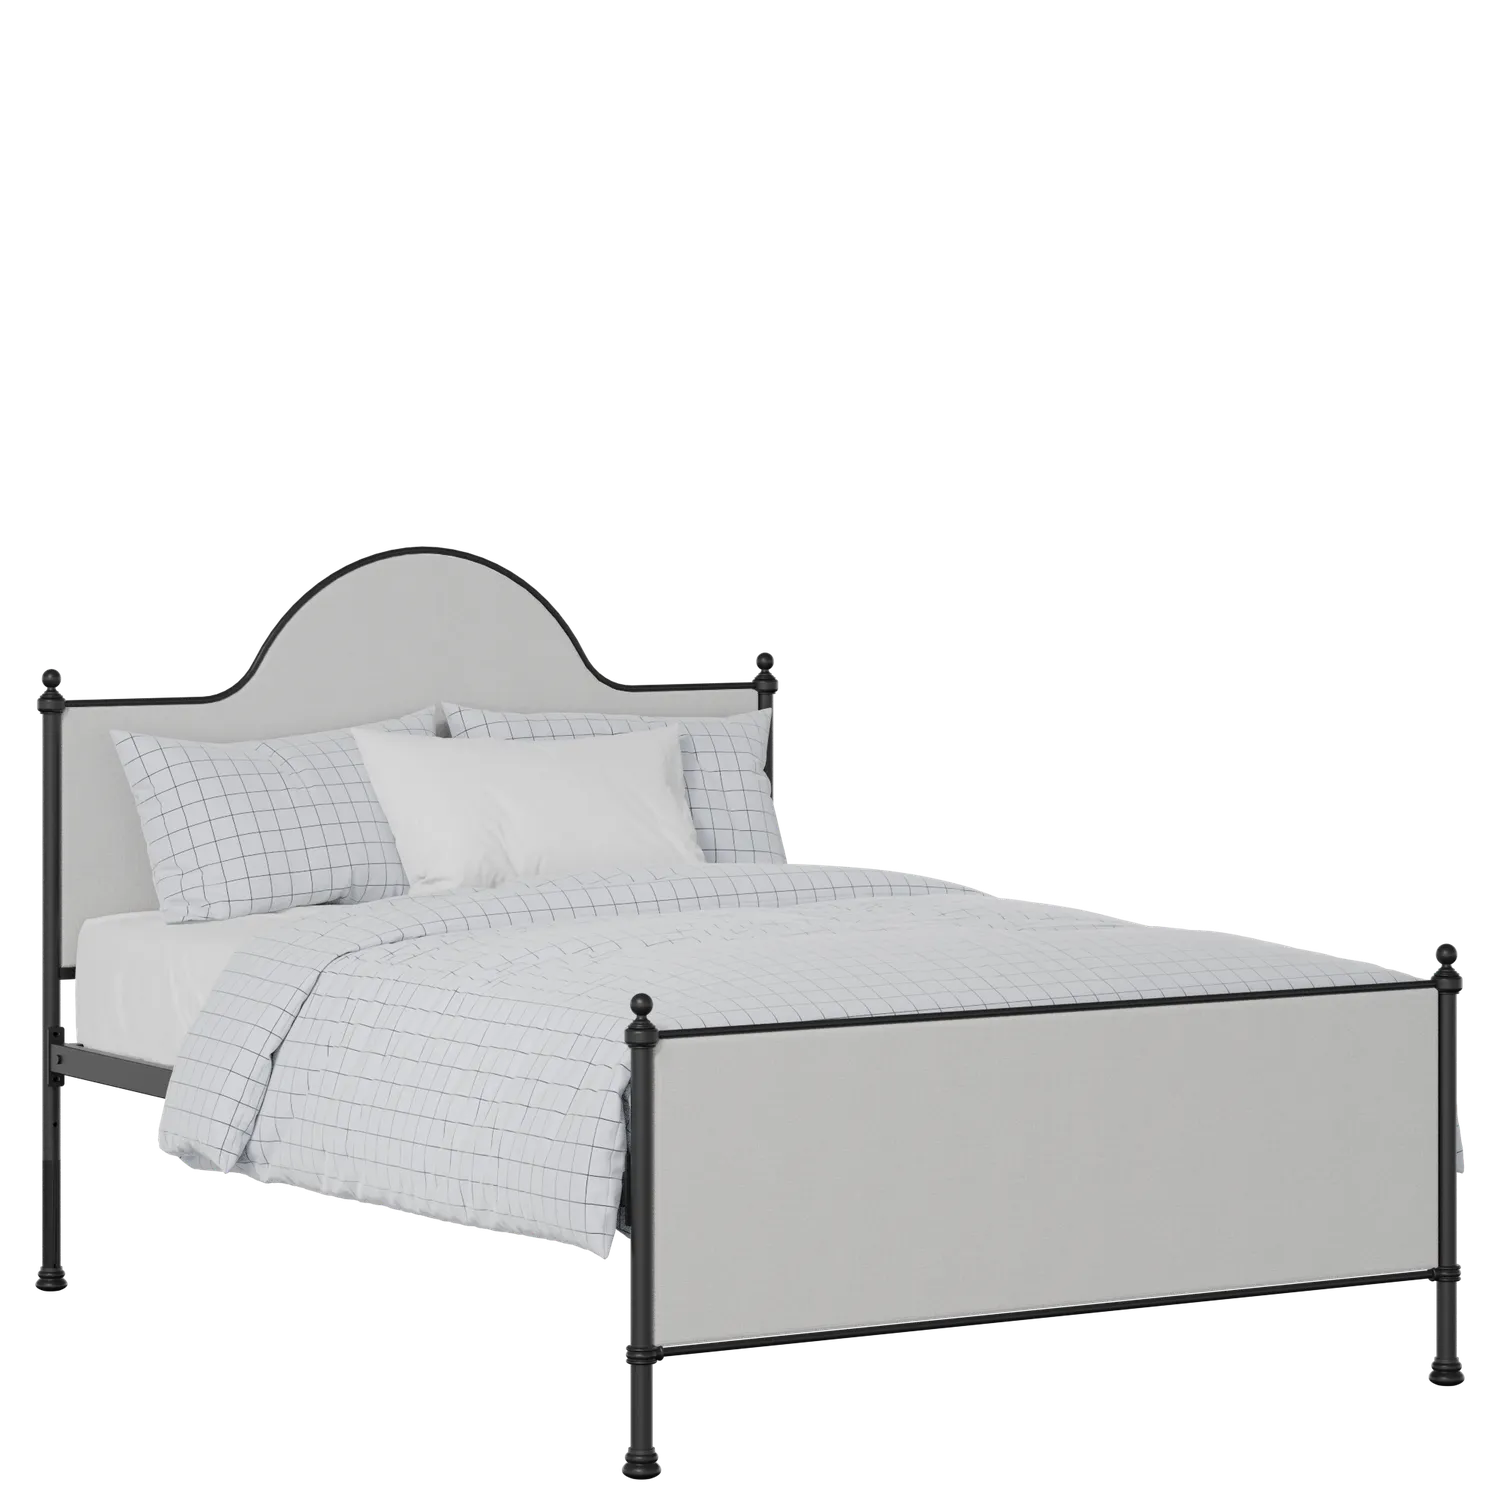 Albert iron/metal upholstered bed in black with silver fabric